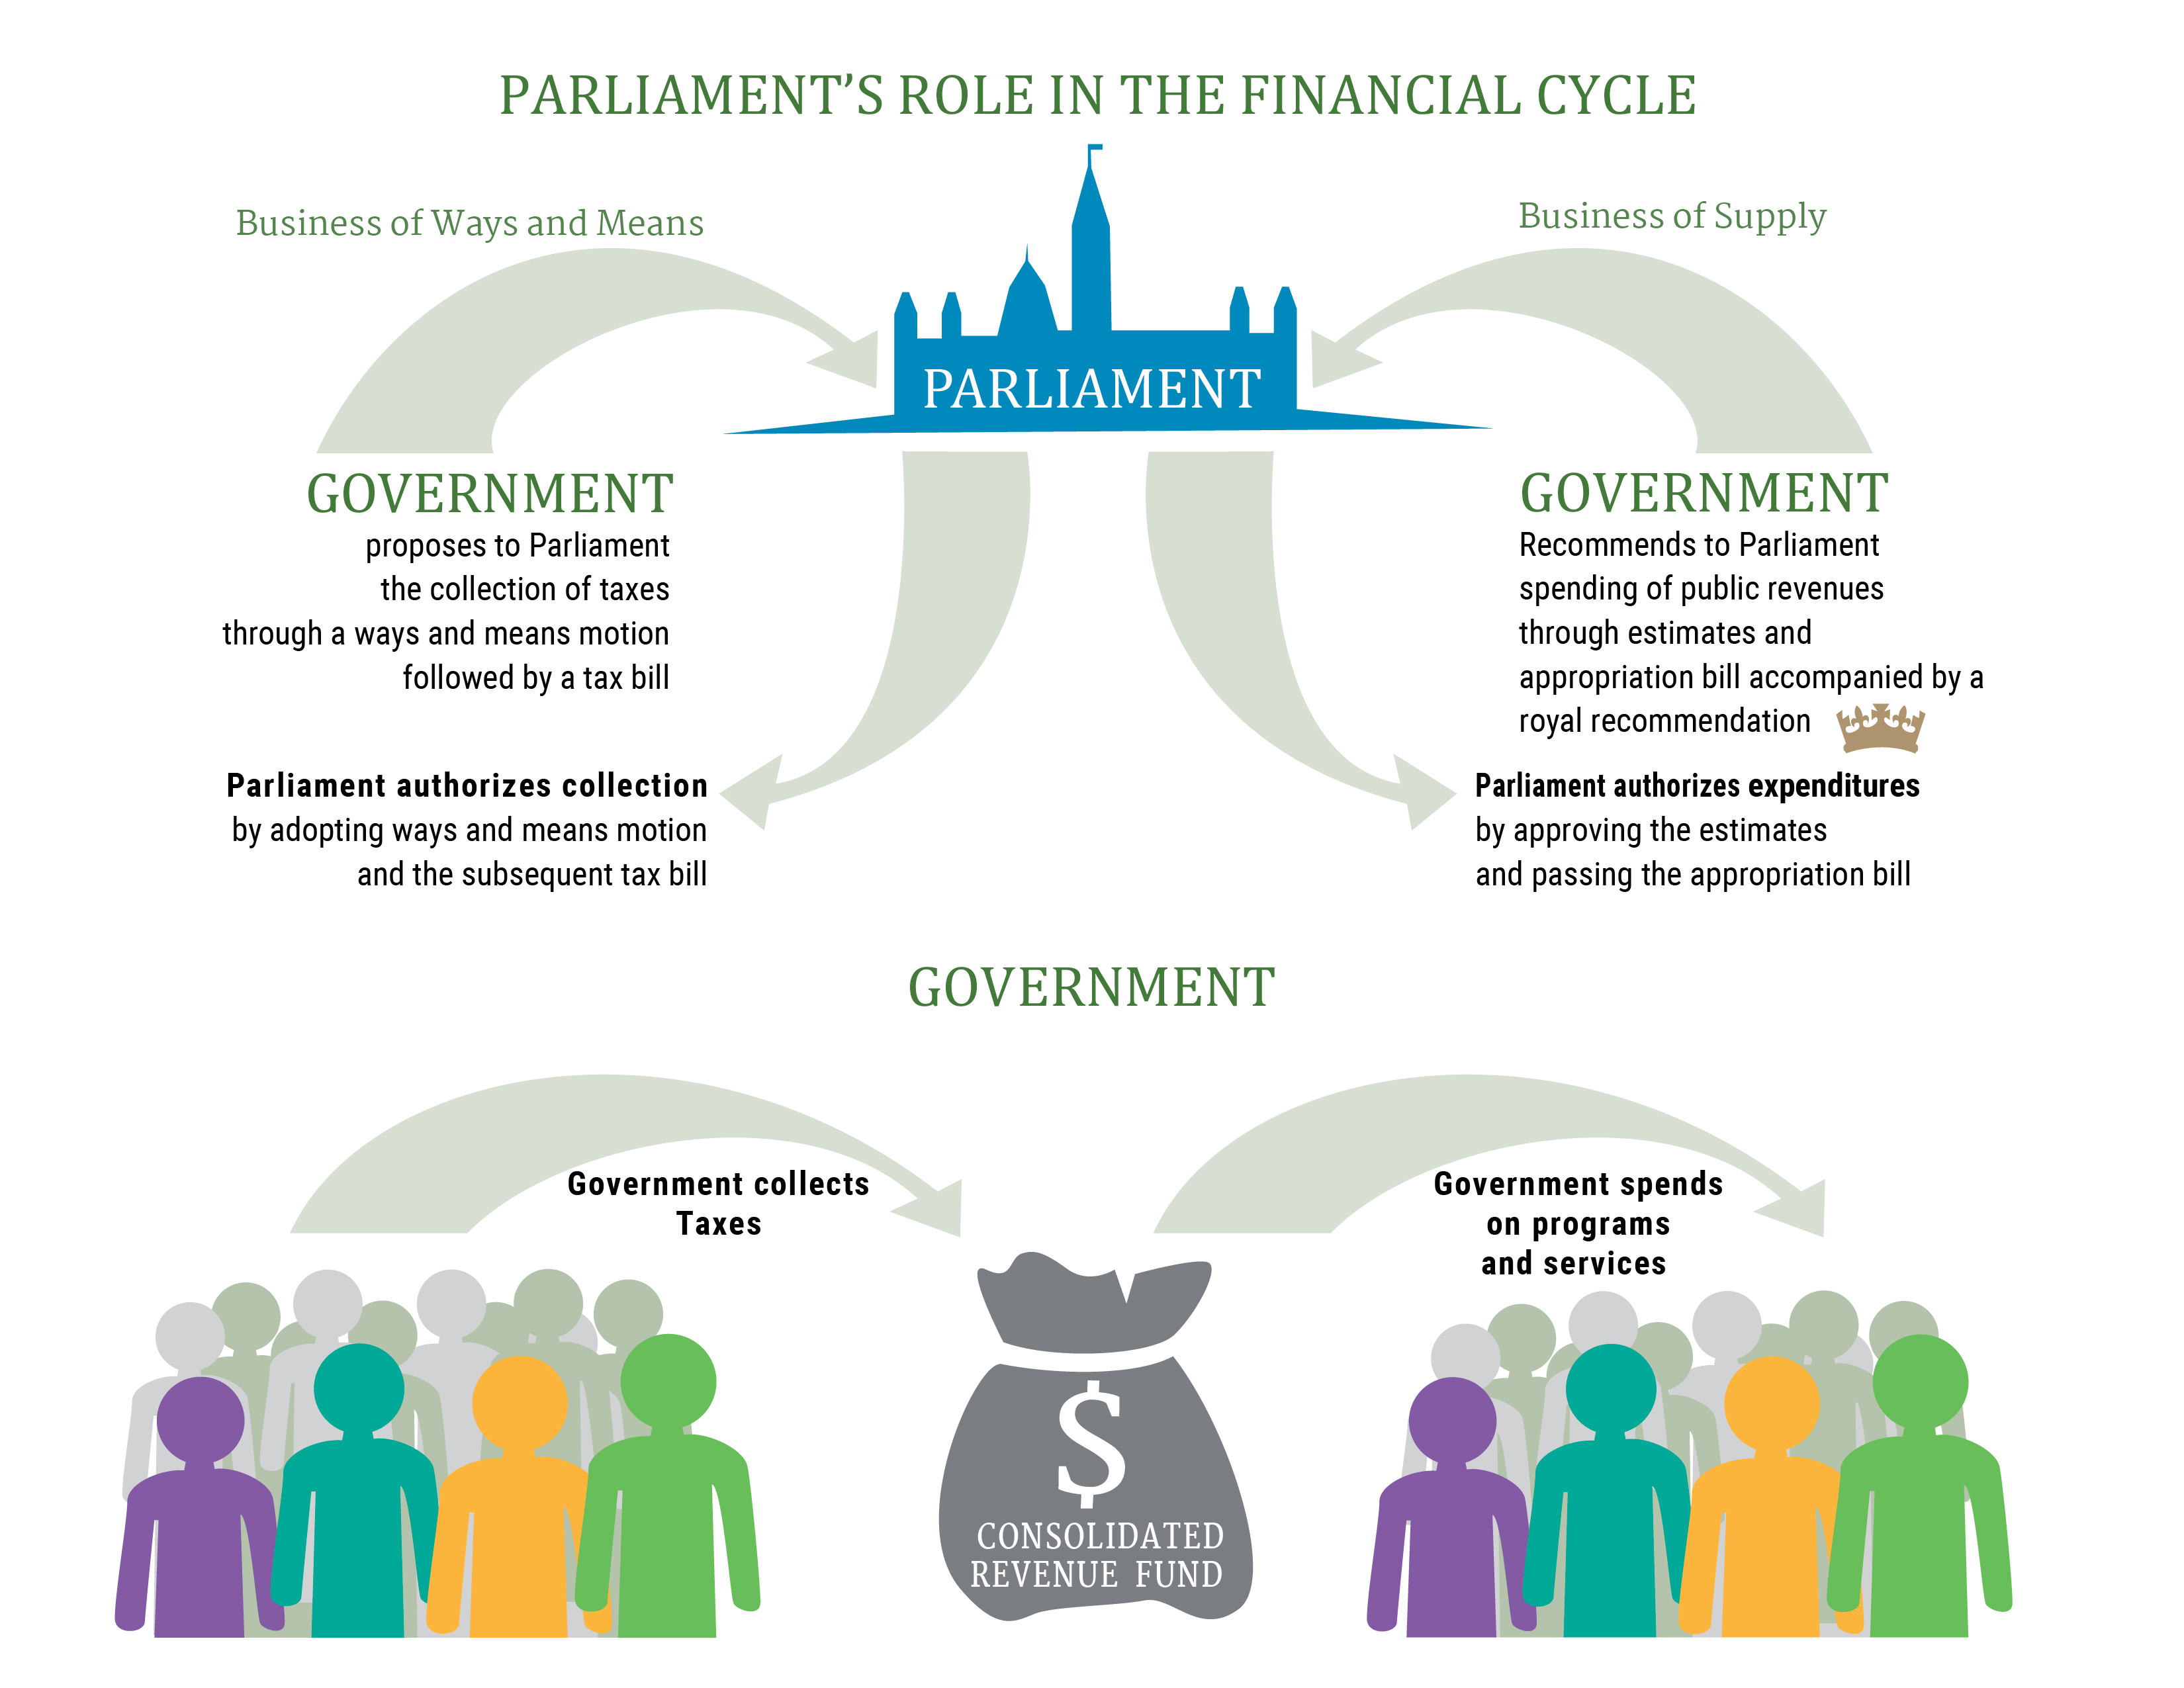 The image shows the interdependence of the executive and legislative branches with respect to fiscal measures.